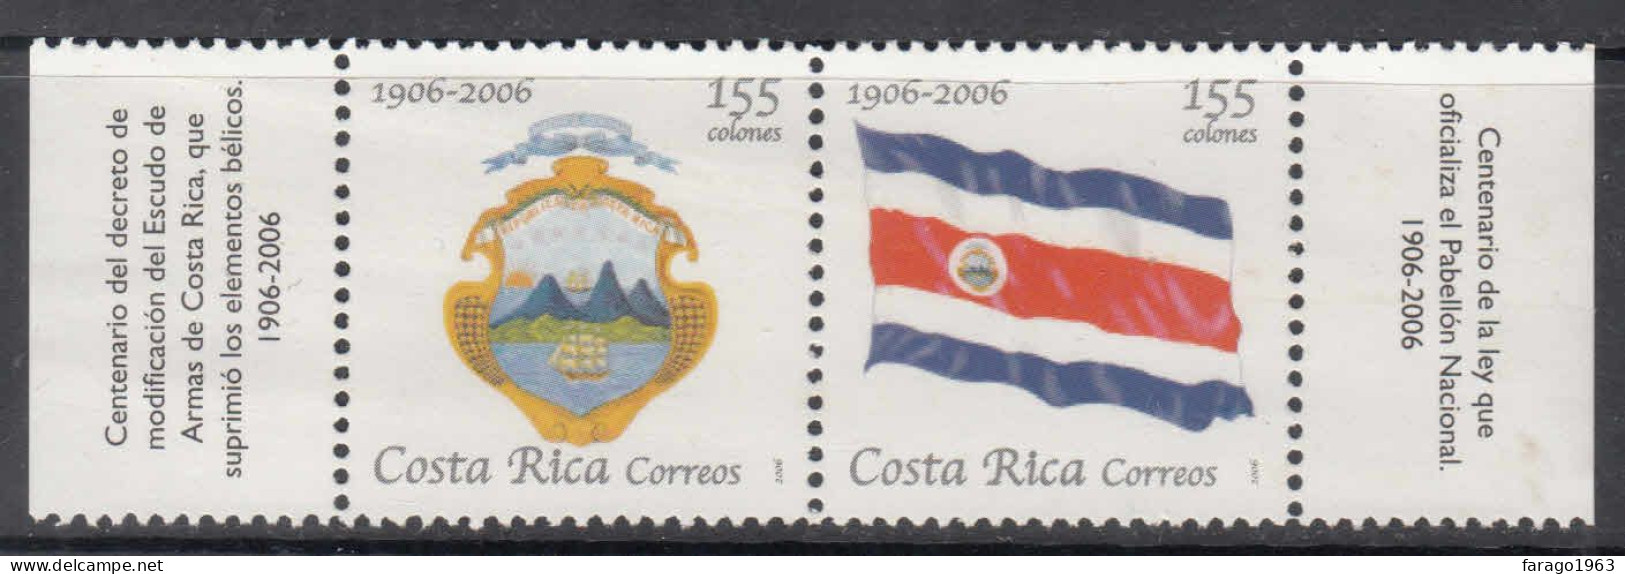 2006 Costa Rica National Symbols Upaep Flags Coats Of Arms  Complete Pair  MNH - Costa Rica